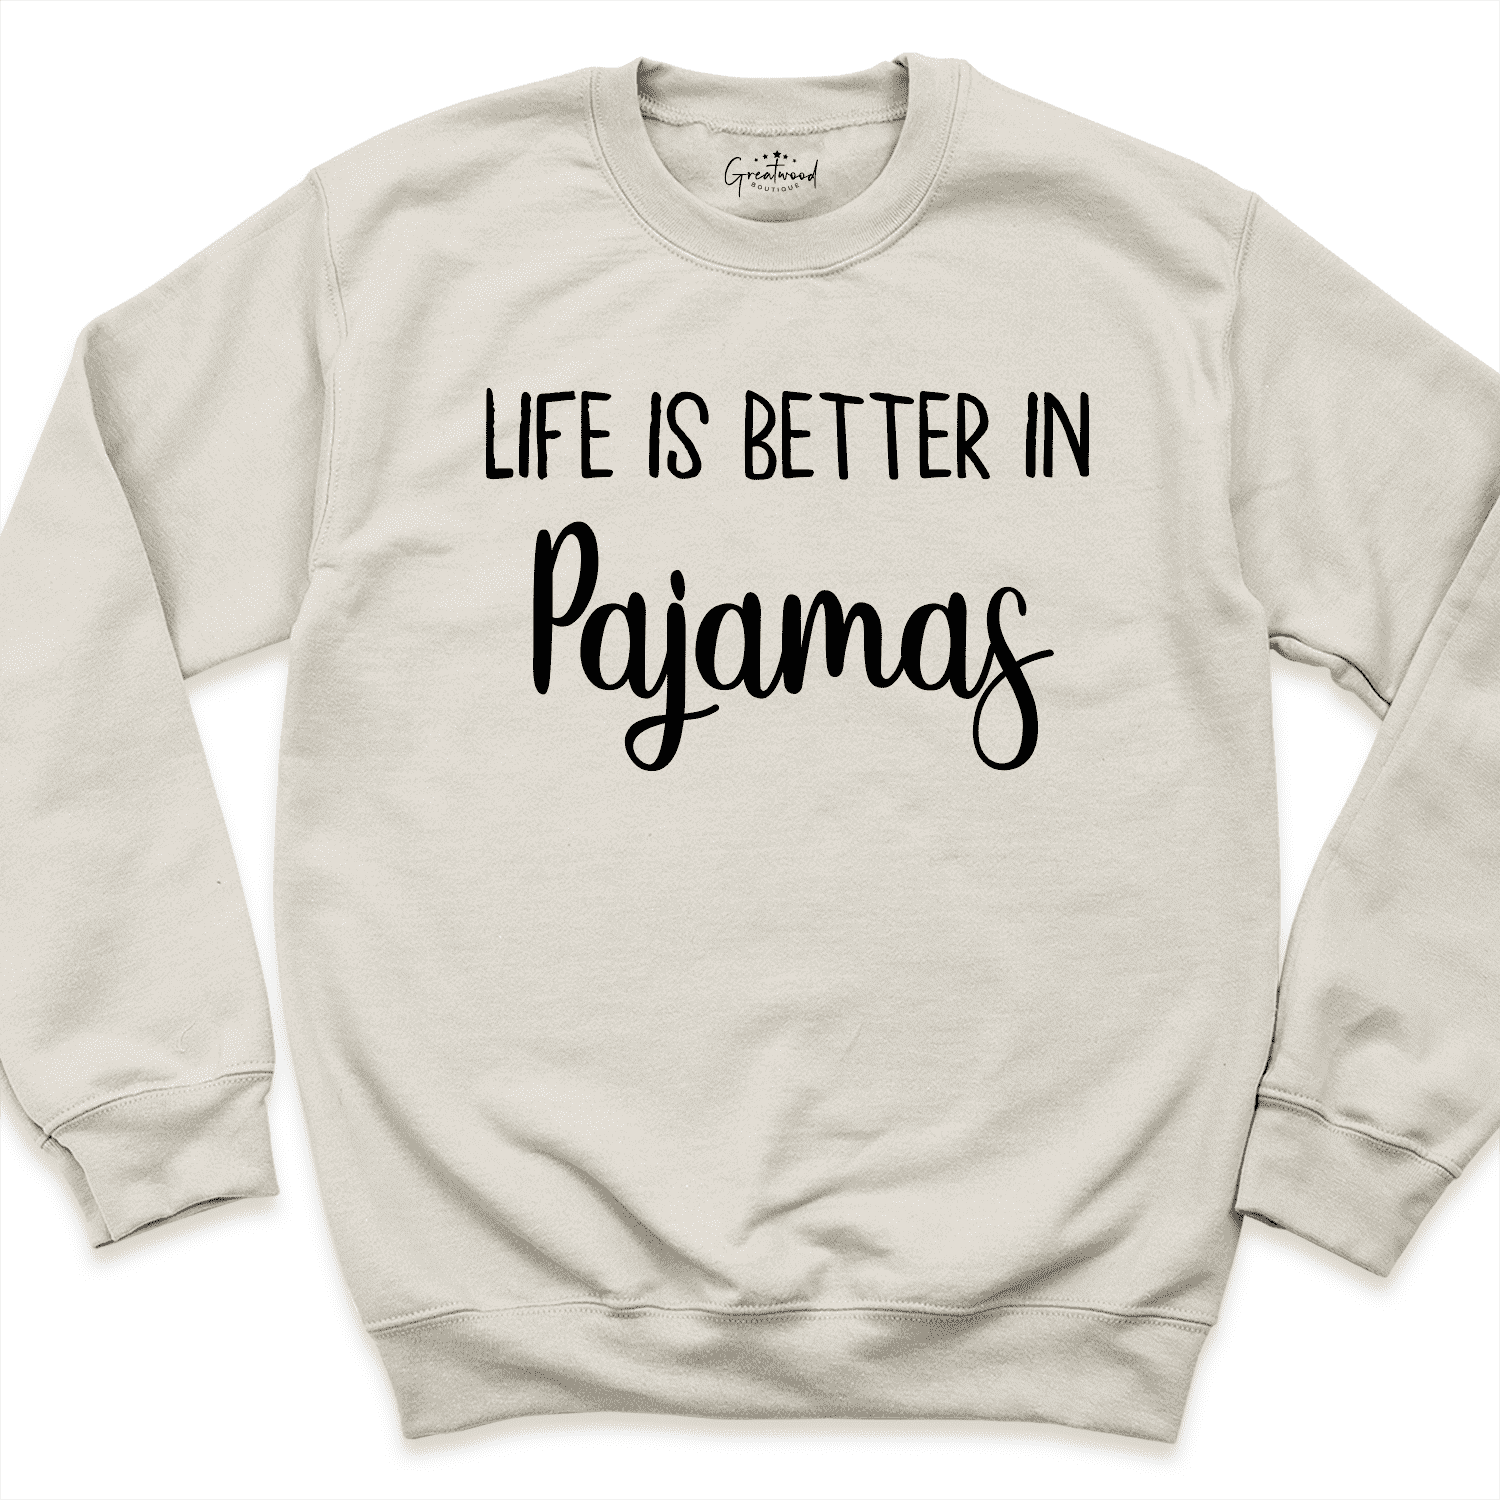 Life is Better in Pajamas Sweatshirt Sand - Greatwood Boutique